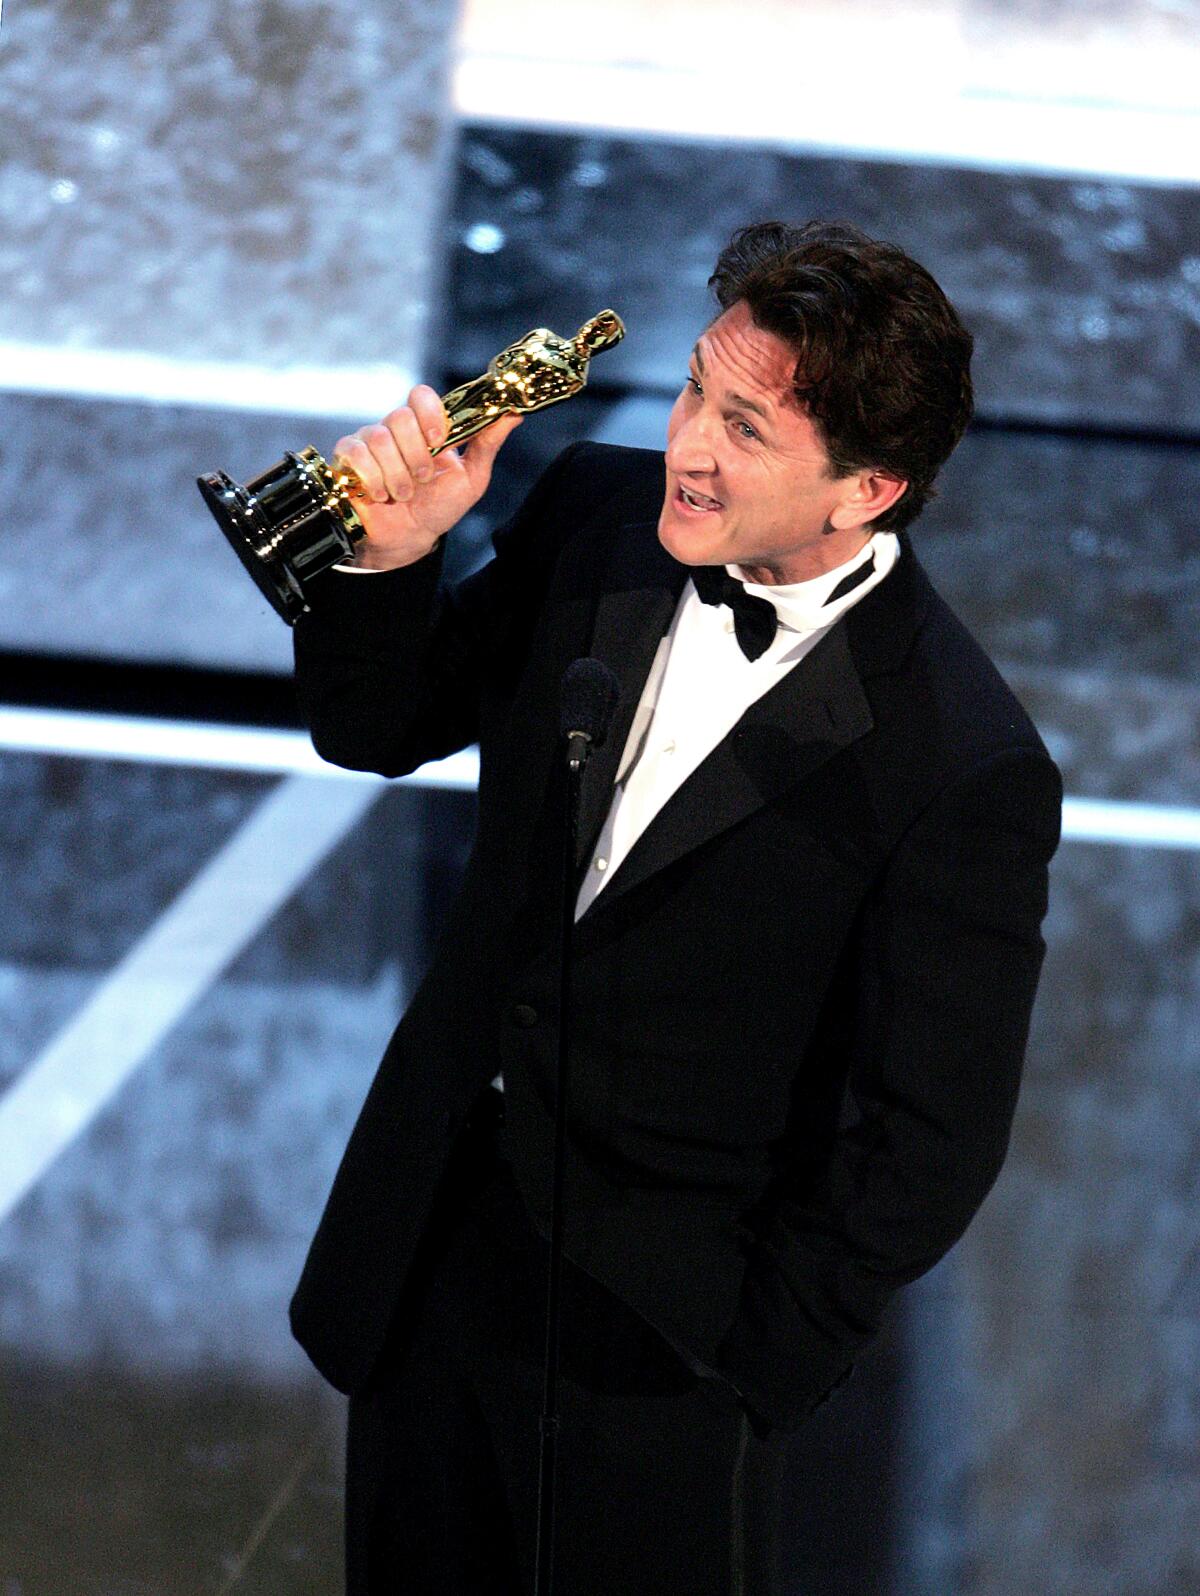 A man in a tuxedo looks upward and raises his right hand, which holds an Oscar statuette